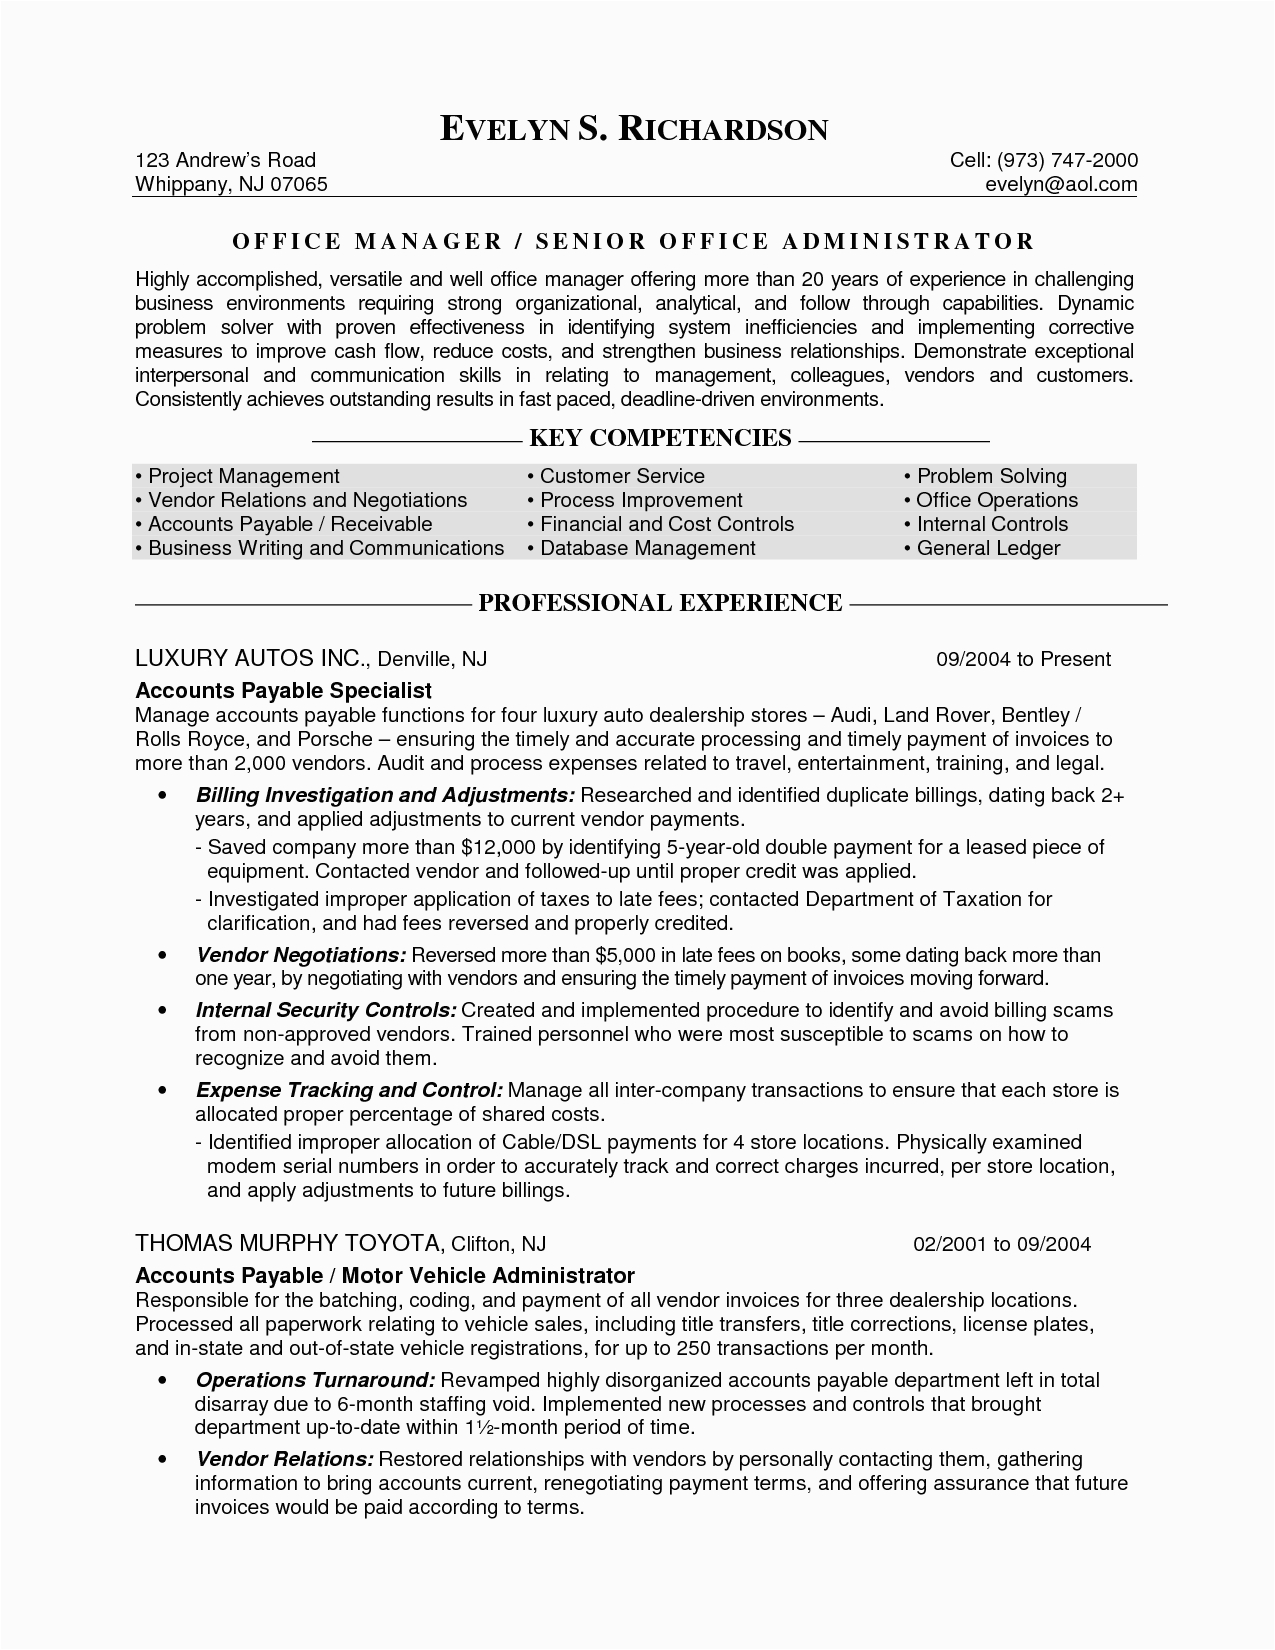 Sample Resume Objective Statements for Project Manager Director Operations Resume Objectives